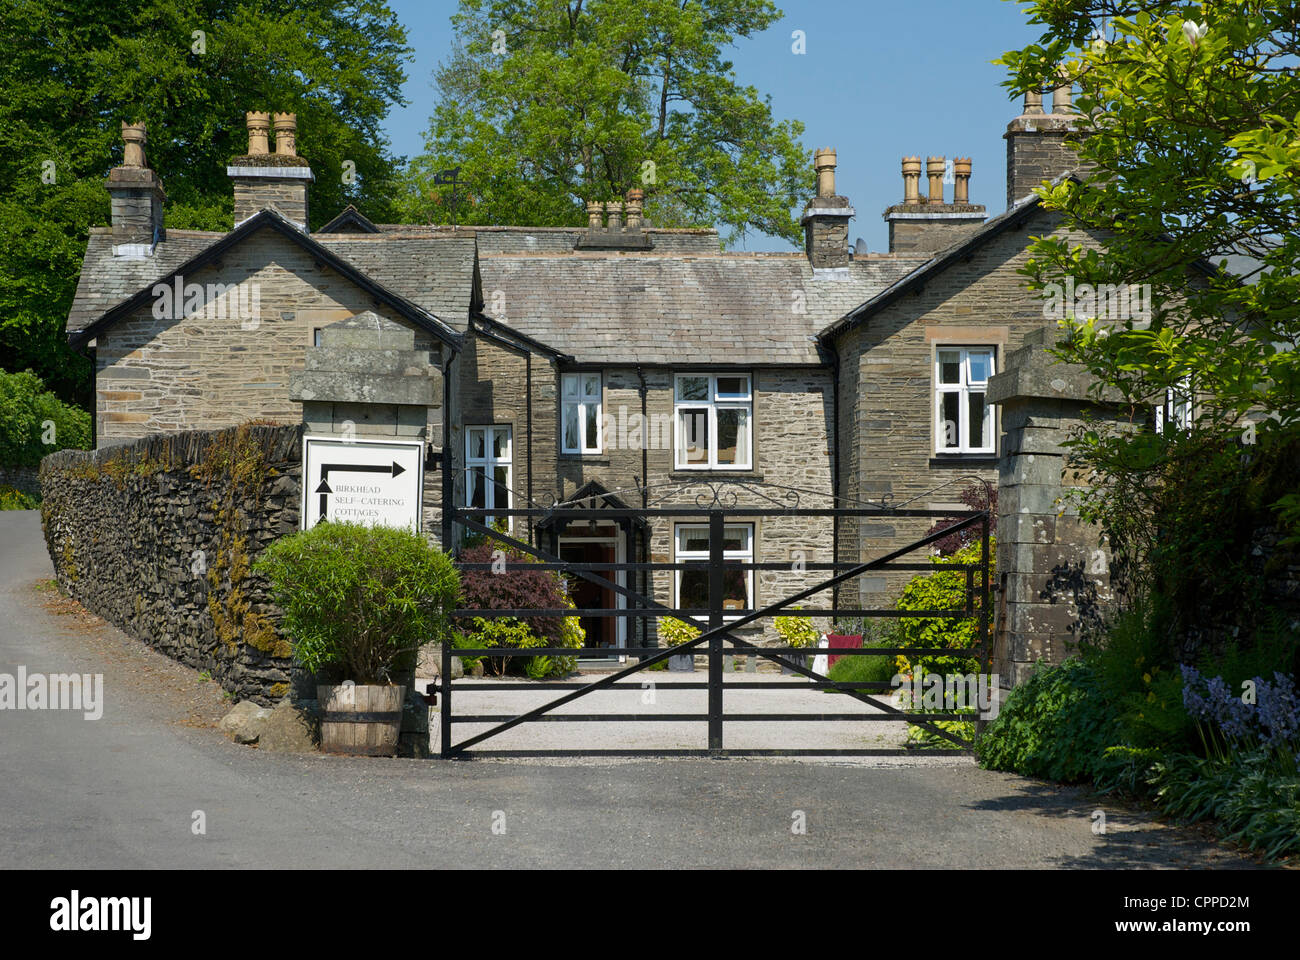 Birkhead holiday cottages, in the village of Troutbeck, Lake ...